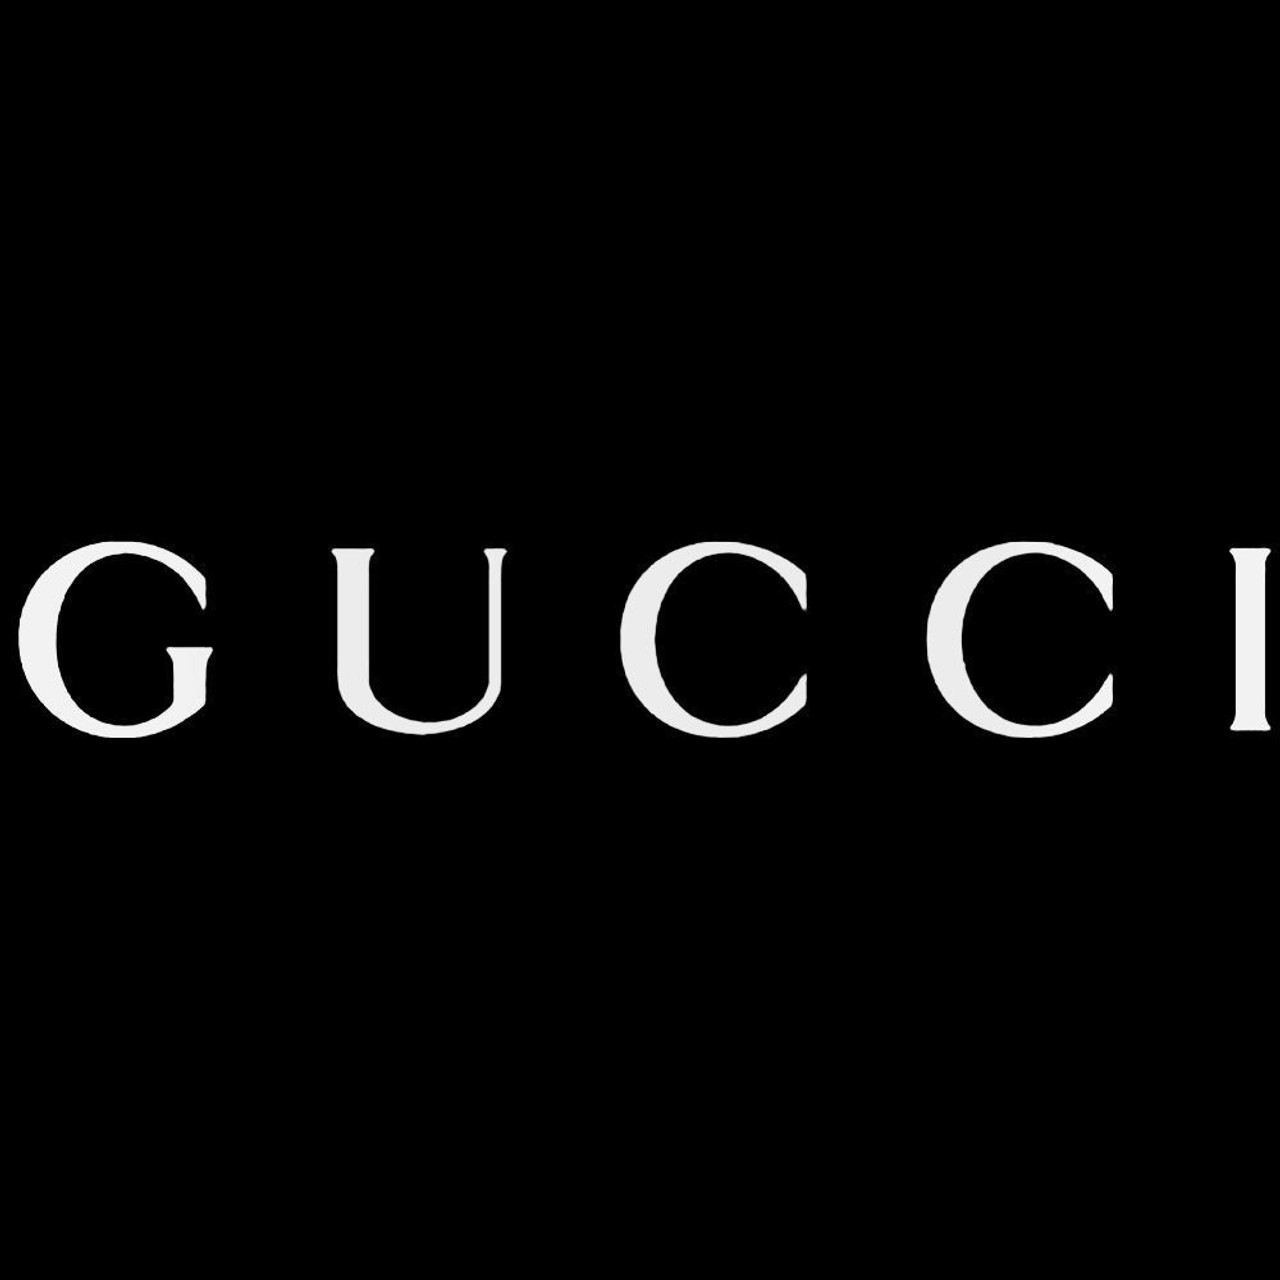 Gucci Group Logo Decal Sticker